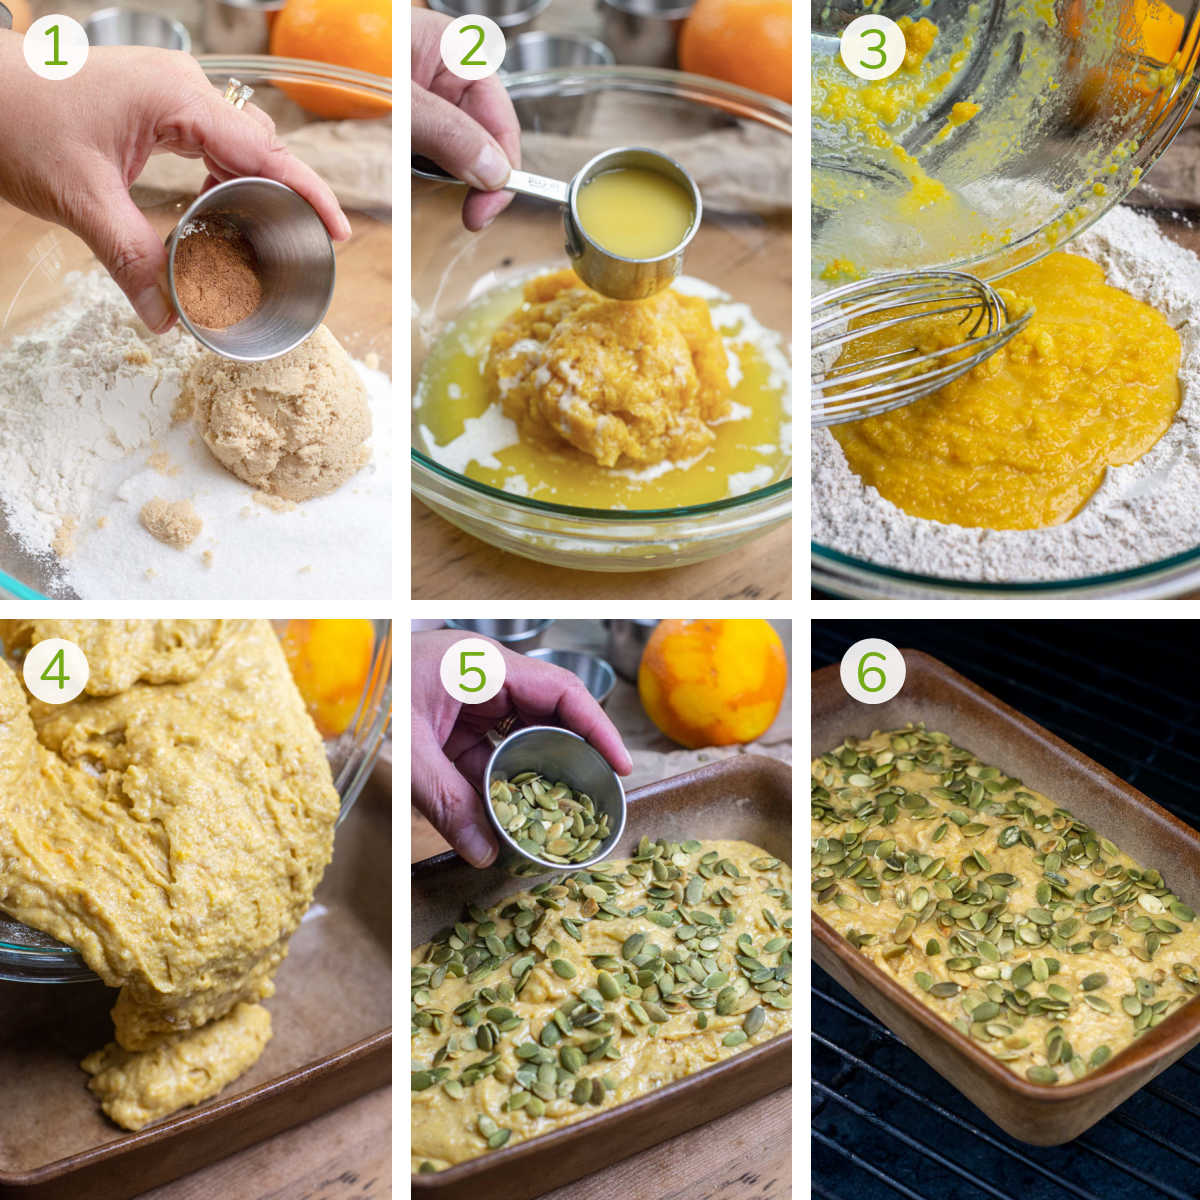 six photos showing the process to mix the dry ingredients, then the wet ingredients, folding them together and grilling.